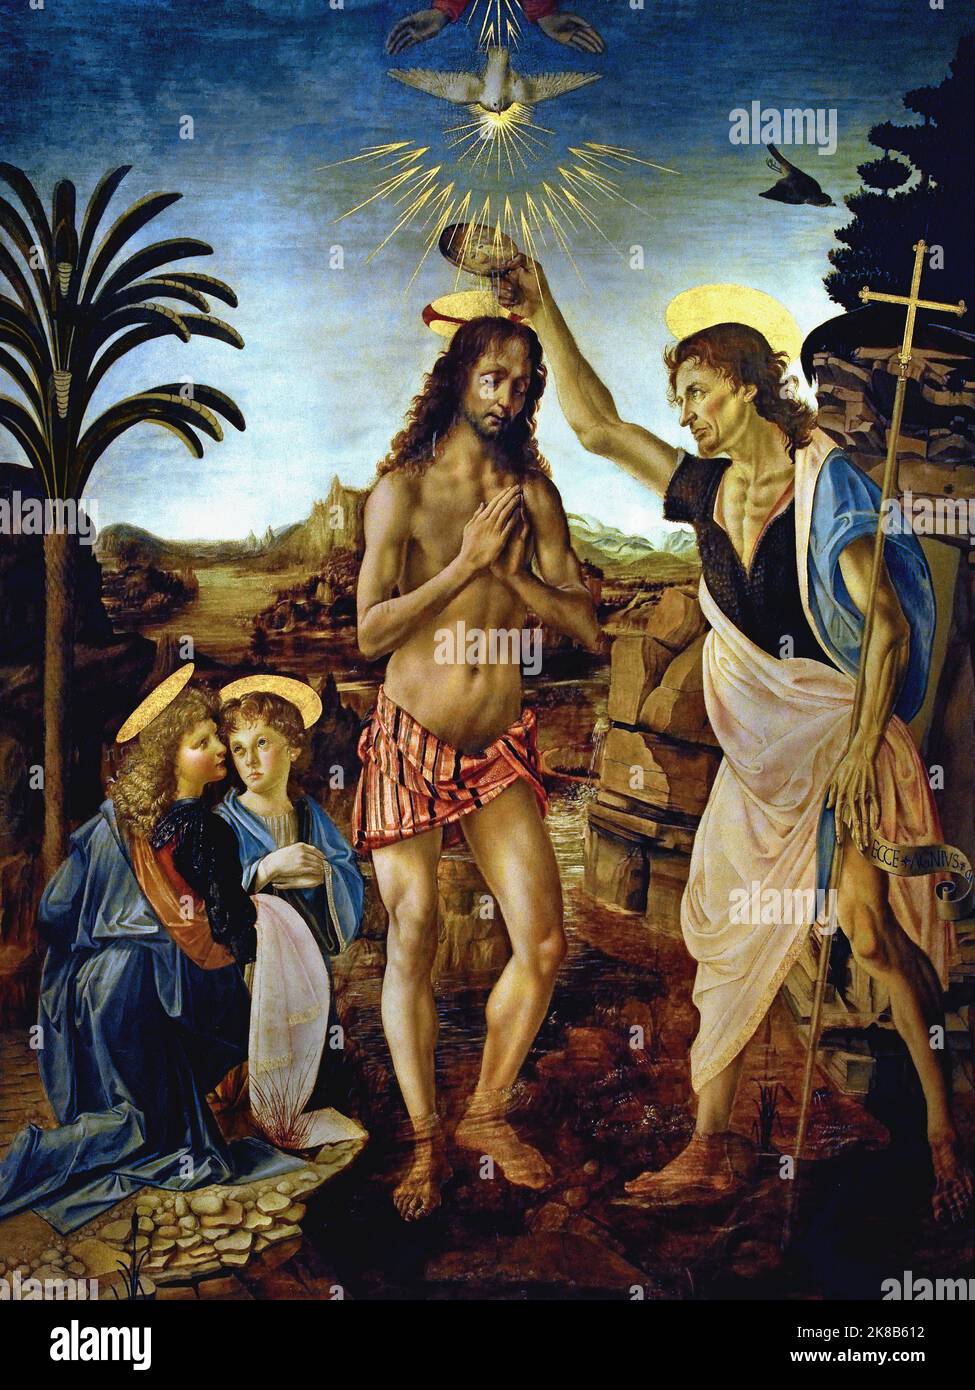 The Baptism of Christ, Andrea del Verrocchio, (Florence 1435- Venice 1488) ,Leonardo da Vinci, (Vinci 1452 – Amboise 1519) , Florence, Italy. ( On the banks of the River Jordan in Palestine, Jesus is being baptized by St John, who is wetting Christ’s head with water. ) Stock Photo